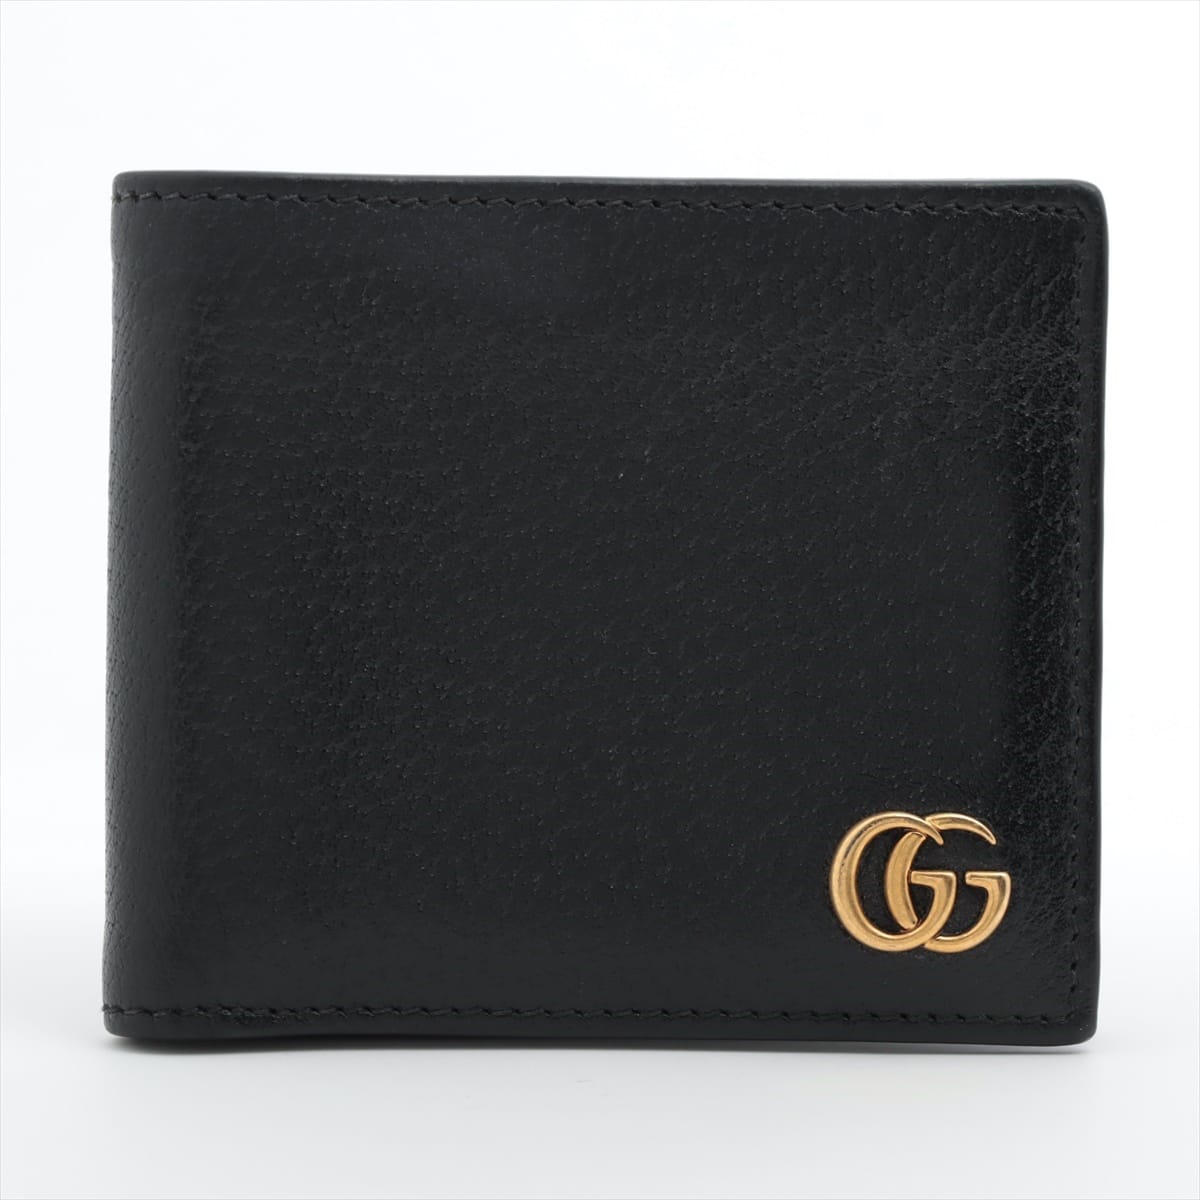 Gucci GG Marmont 428725 Leather Wallet Black